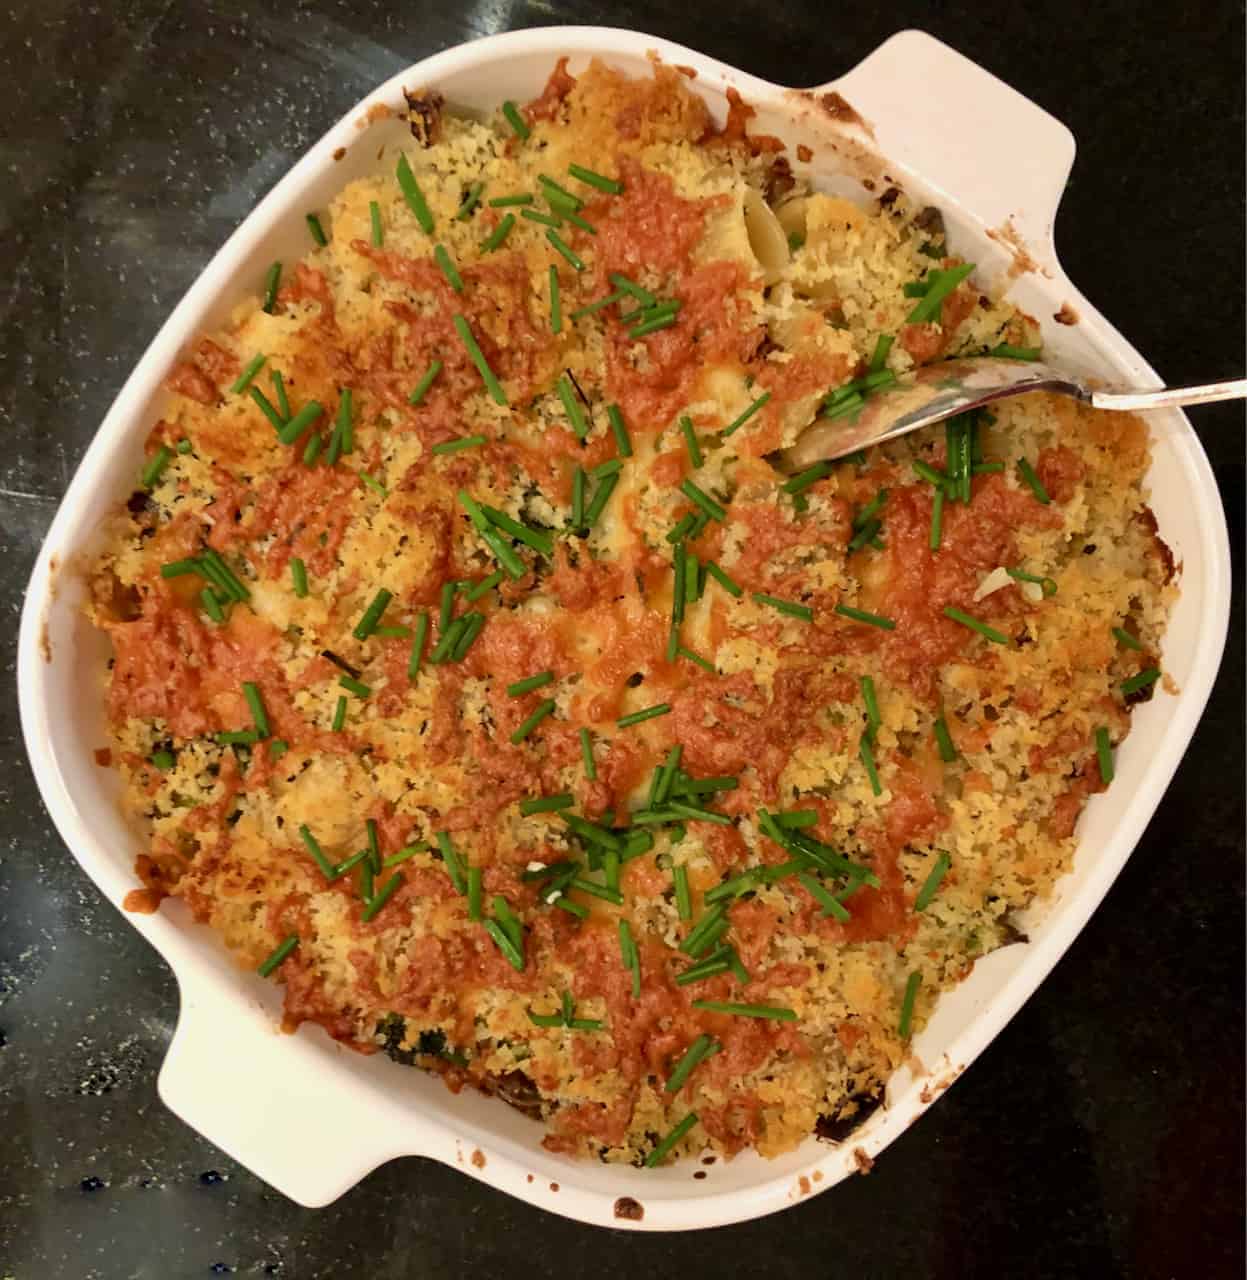 Spicy Baked Pasta with Cheddar and Broccoli